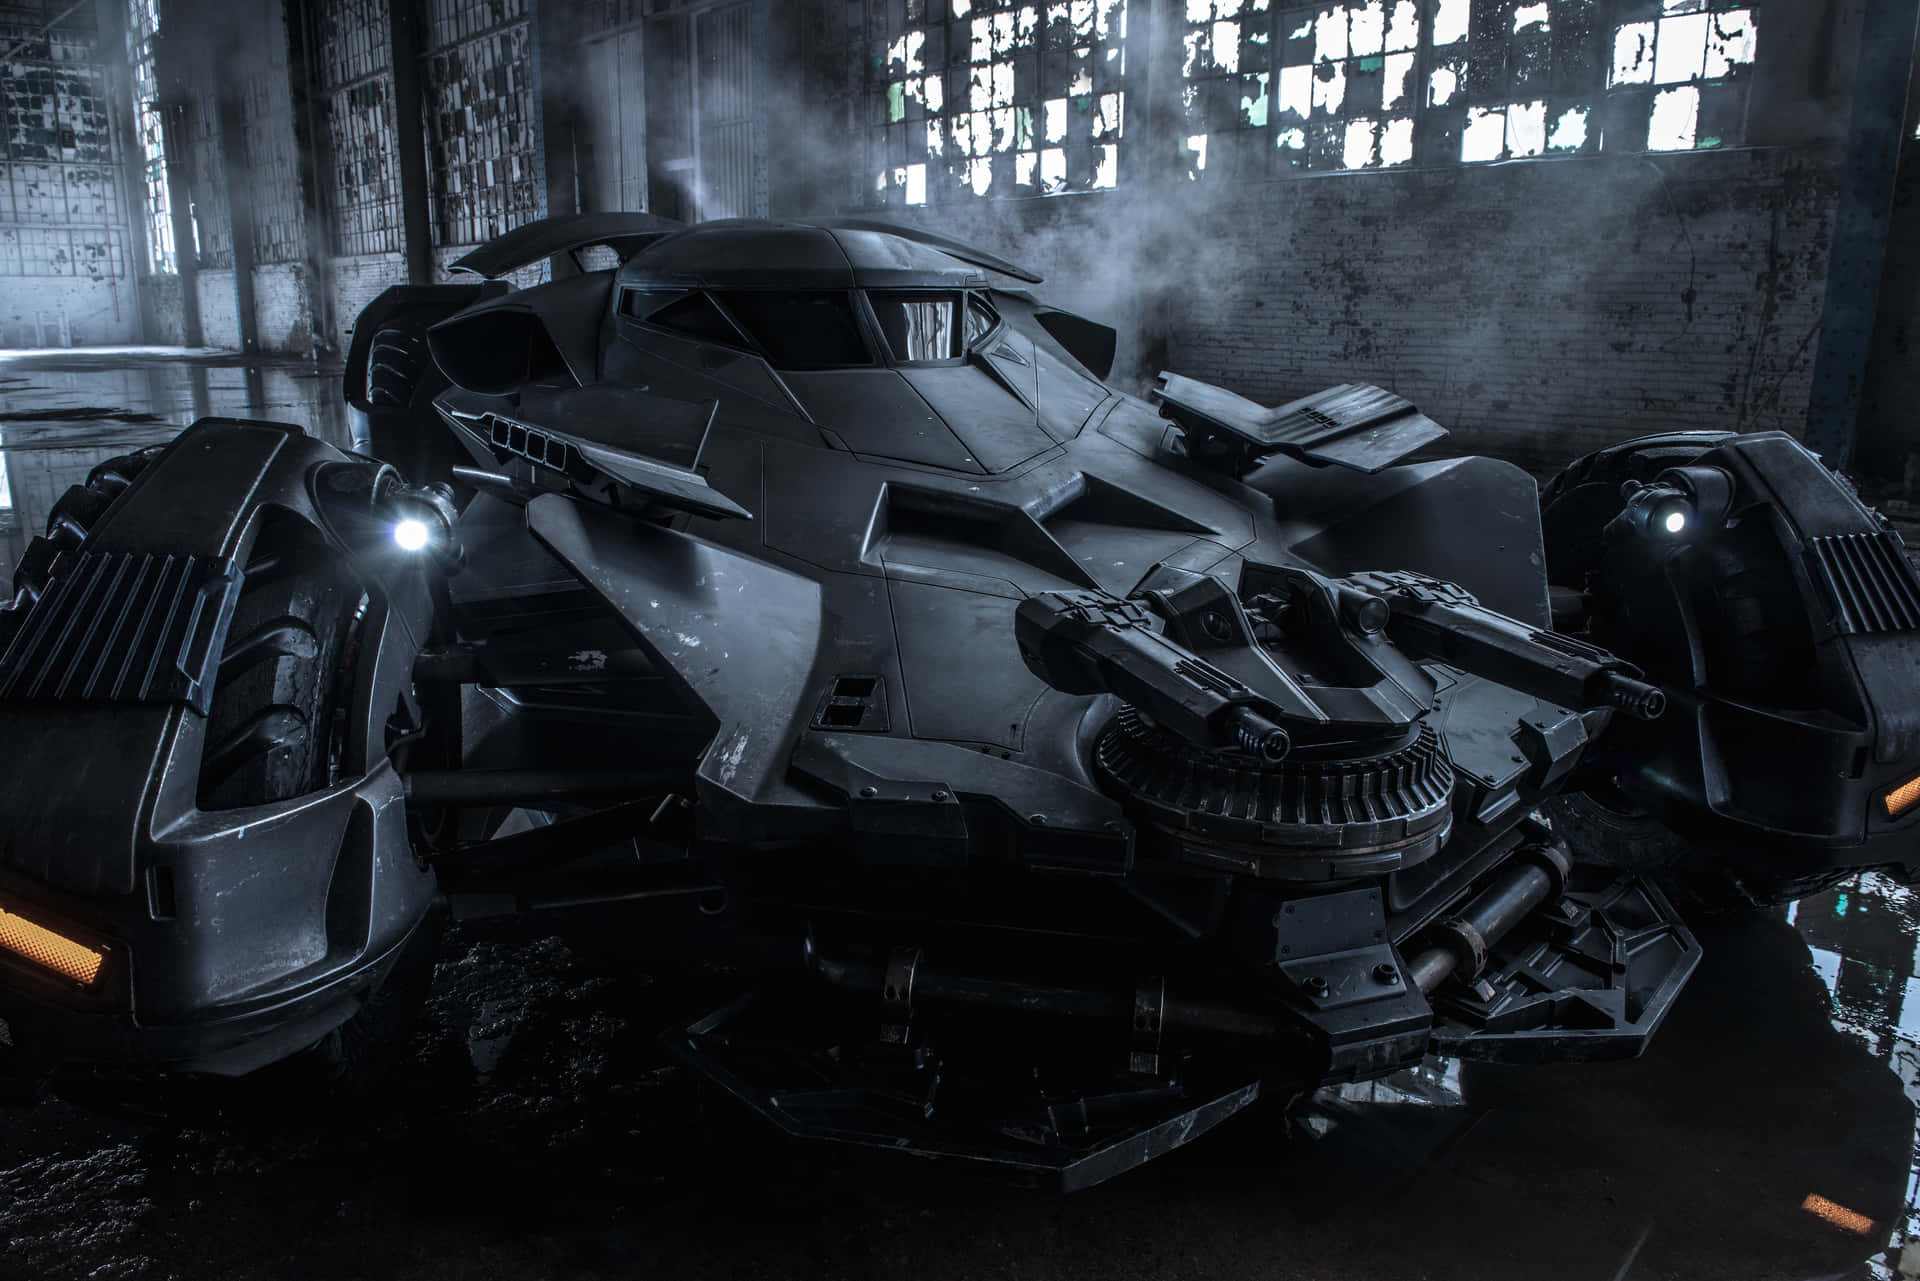 Dark knight rises with the power and speed of 4K Batmobile